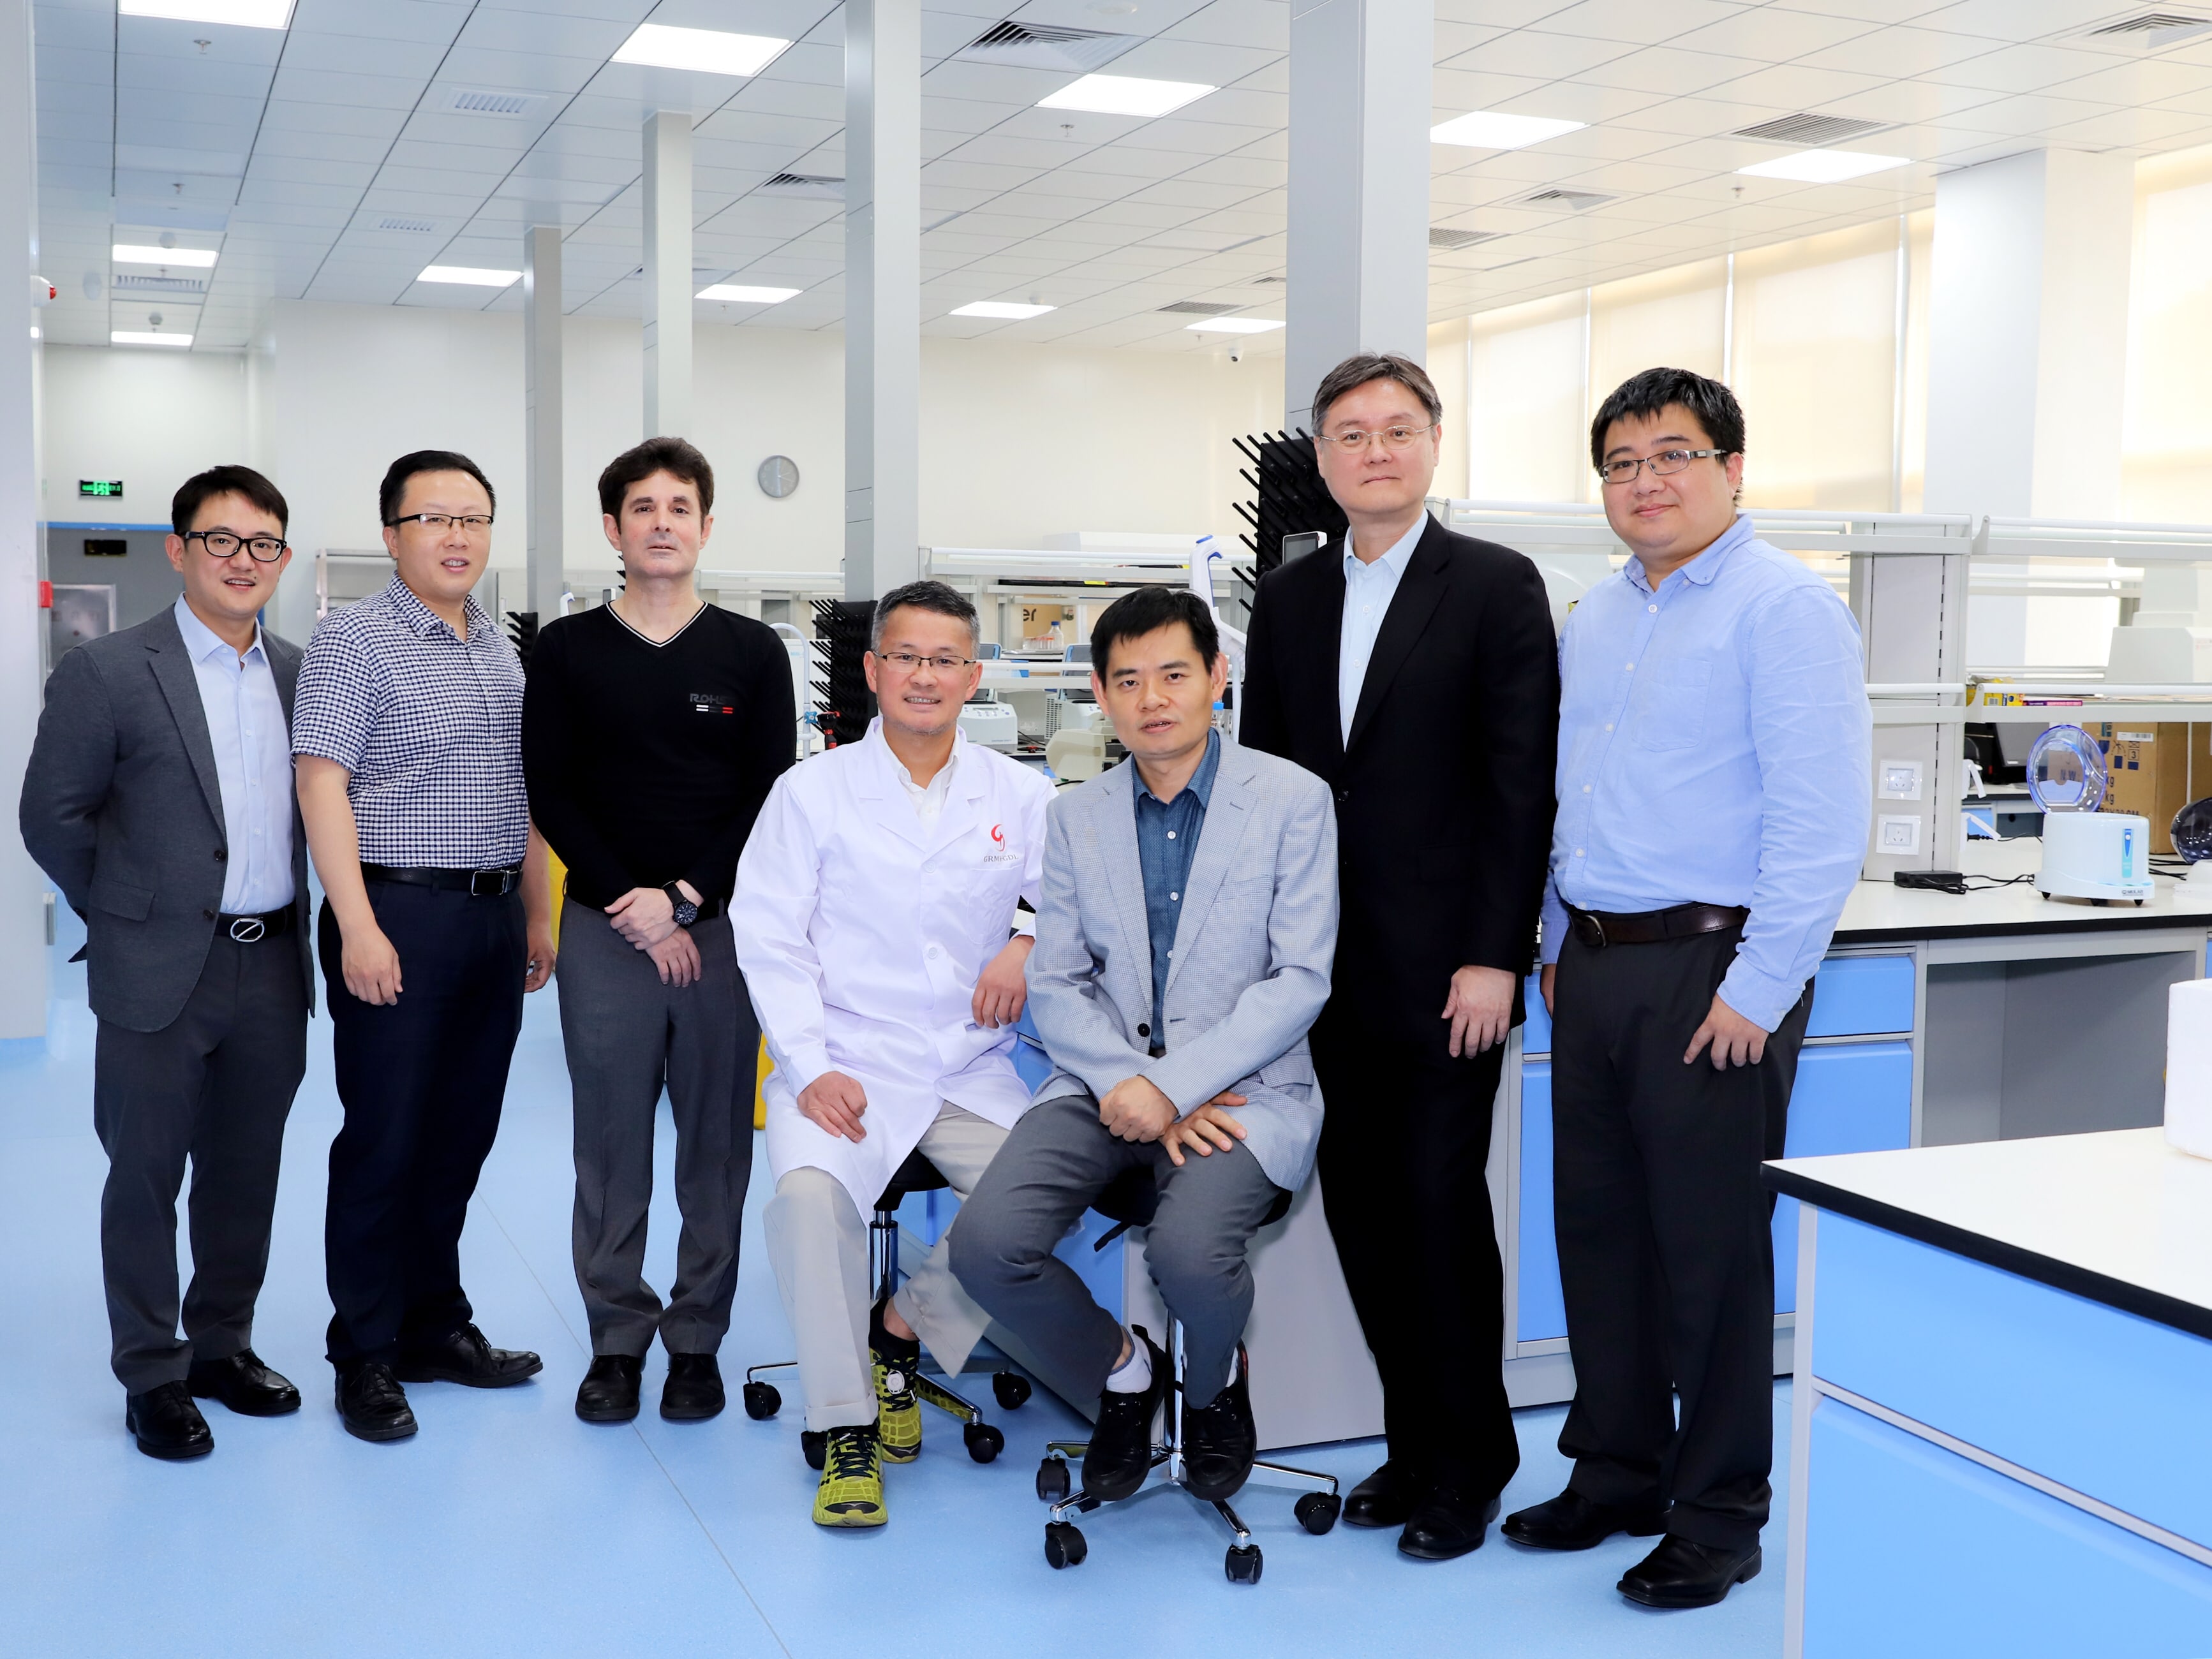 Co-Directors (middle seated, left to right): Prof. Pei Duanqing, Prof. Pan Guangjin; Core team members (from left back to right): Mr. Gong Jucheng, Prof. Qin Dajiang, Dr. Micky Tortorella, Mr. Eddie Ching, Dr. Wang Yaofeng.